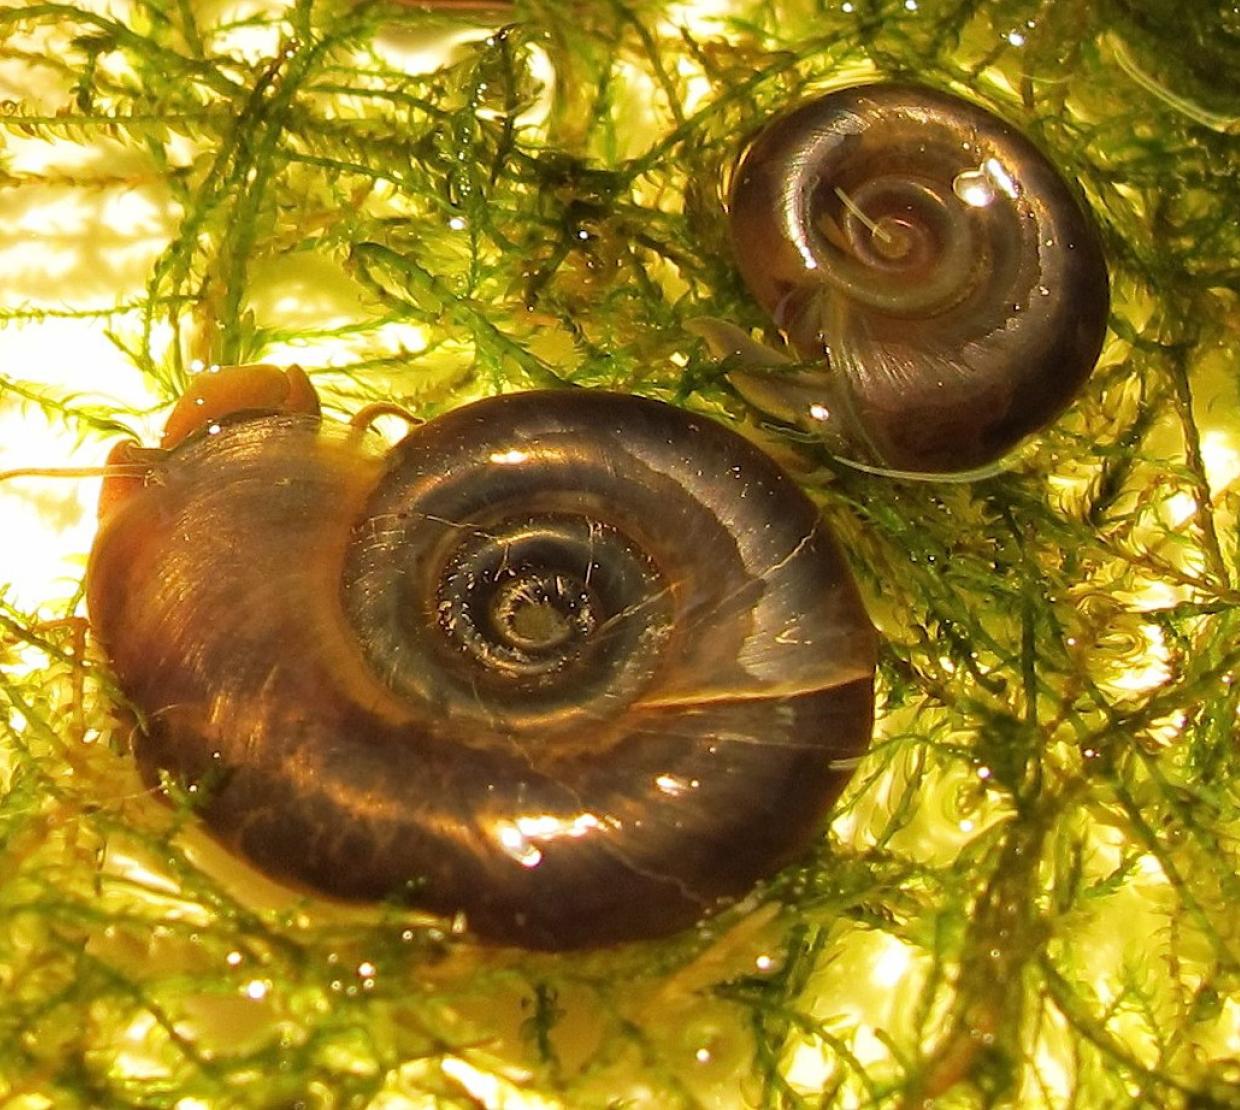 Two aquatic snails resting on a bed of seaweed